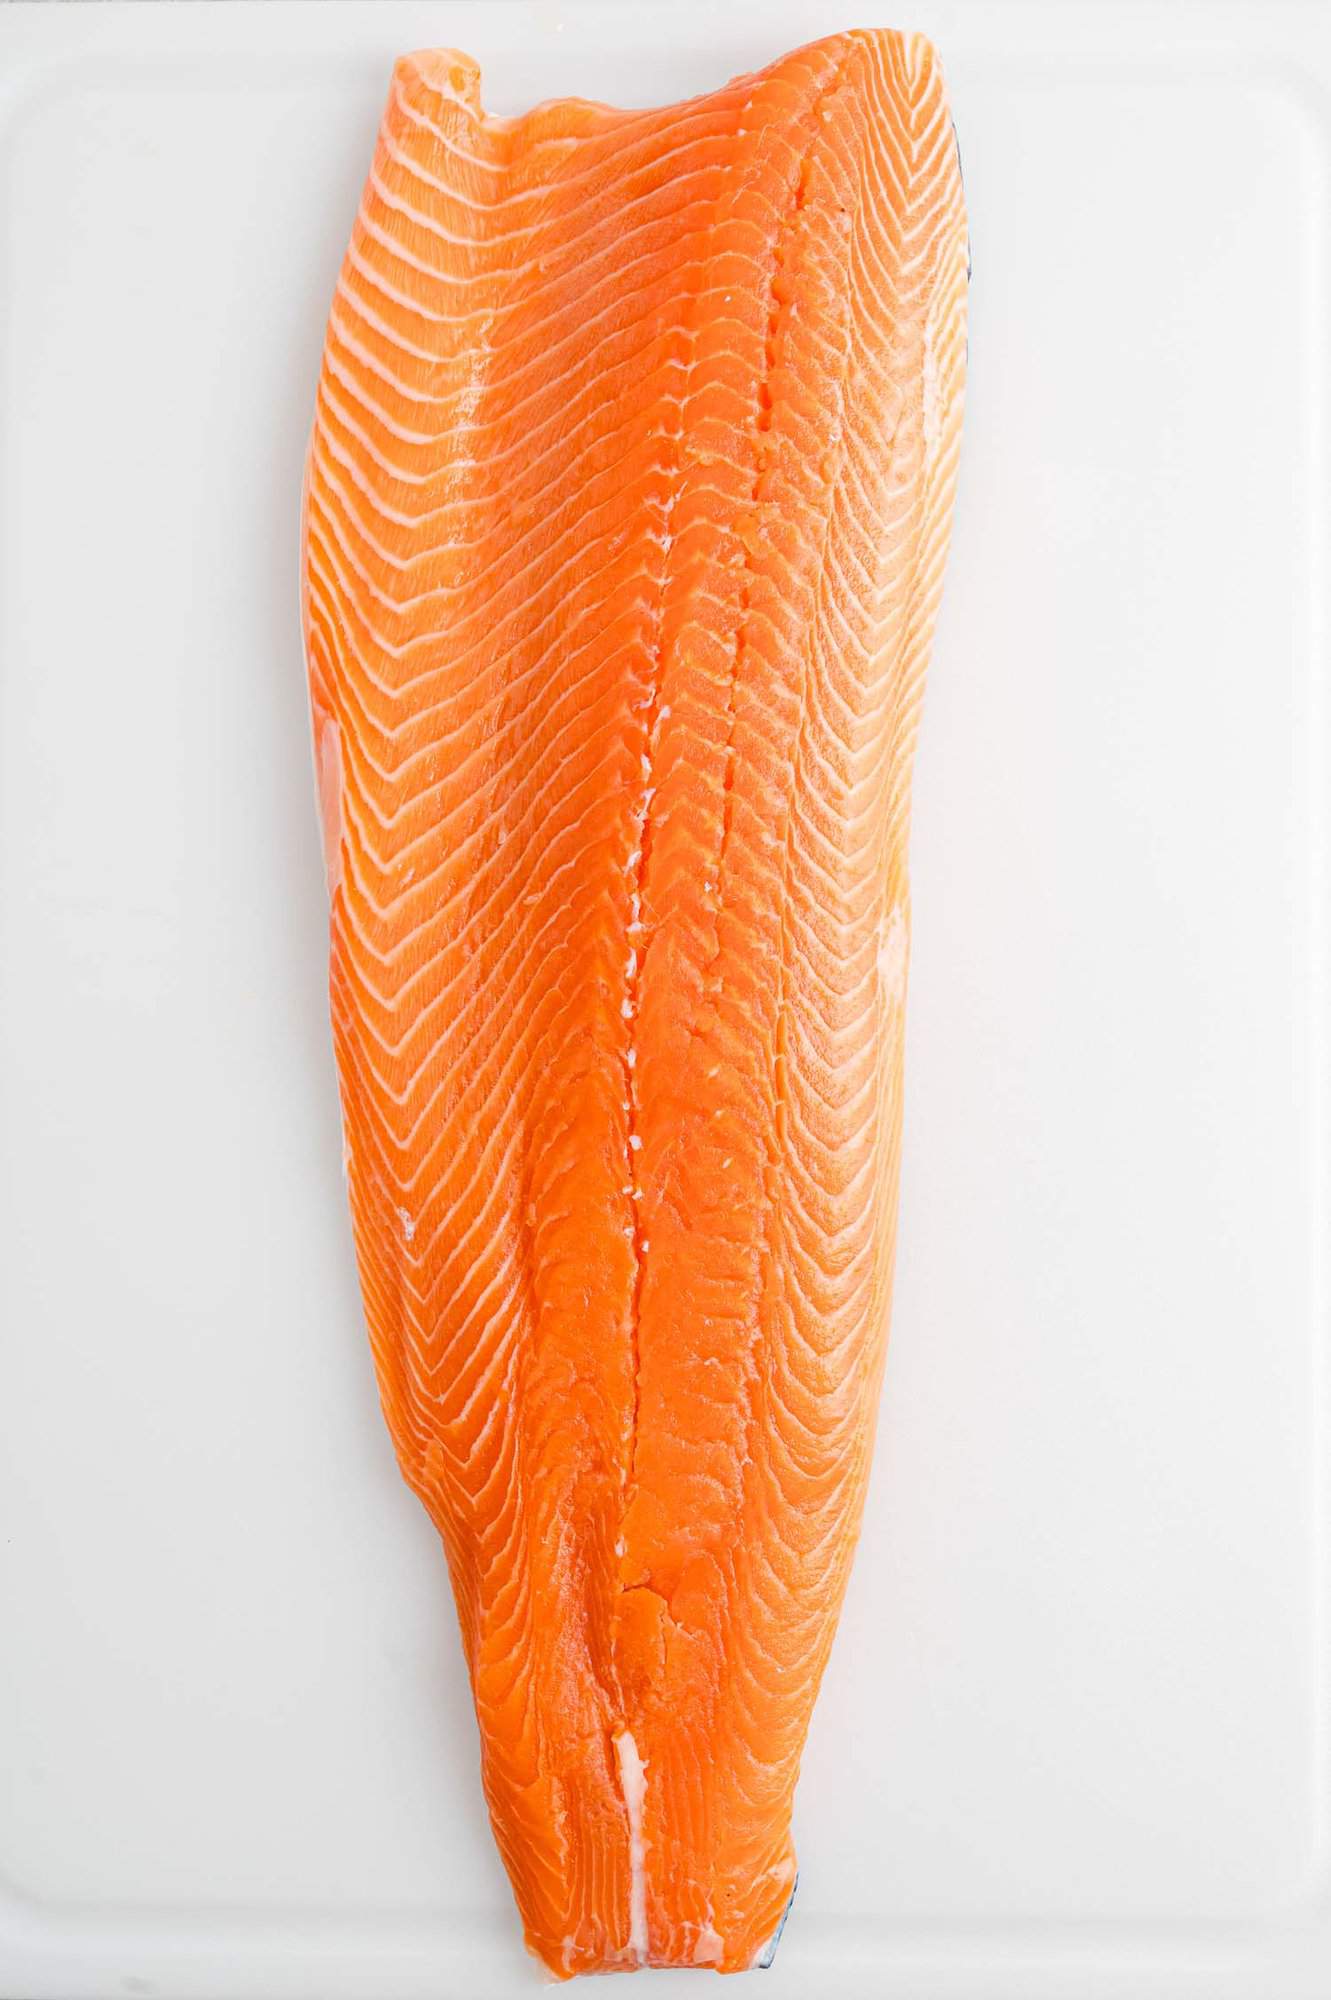 Overhead view of a whole side of salmon laid out on a white countertop.